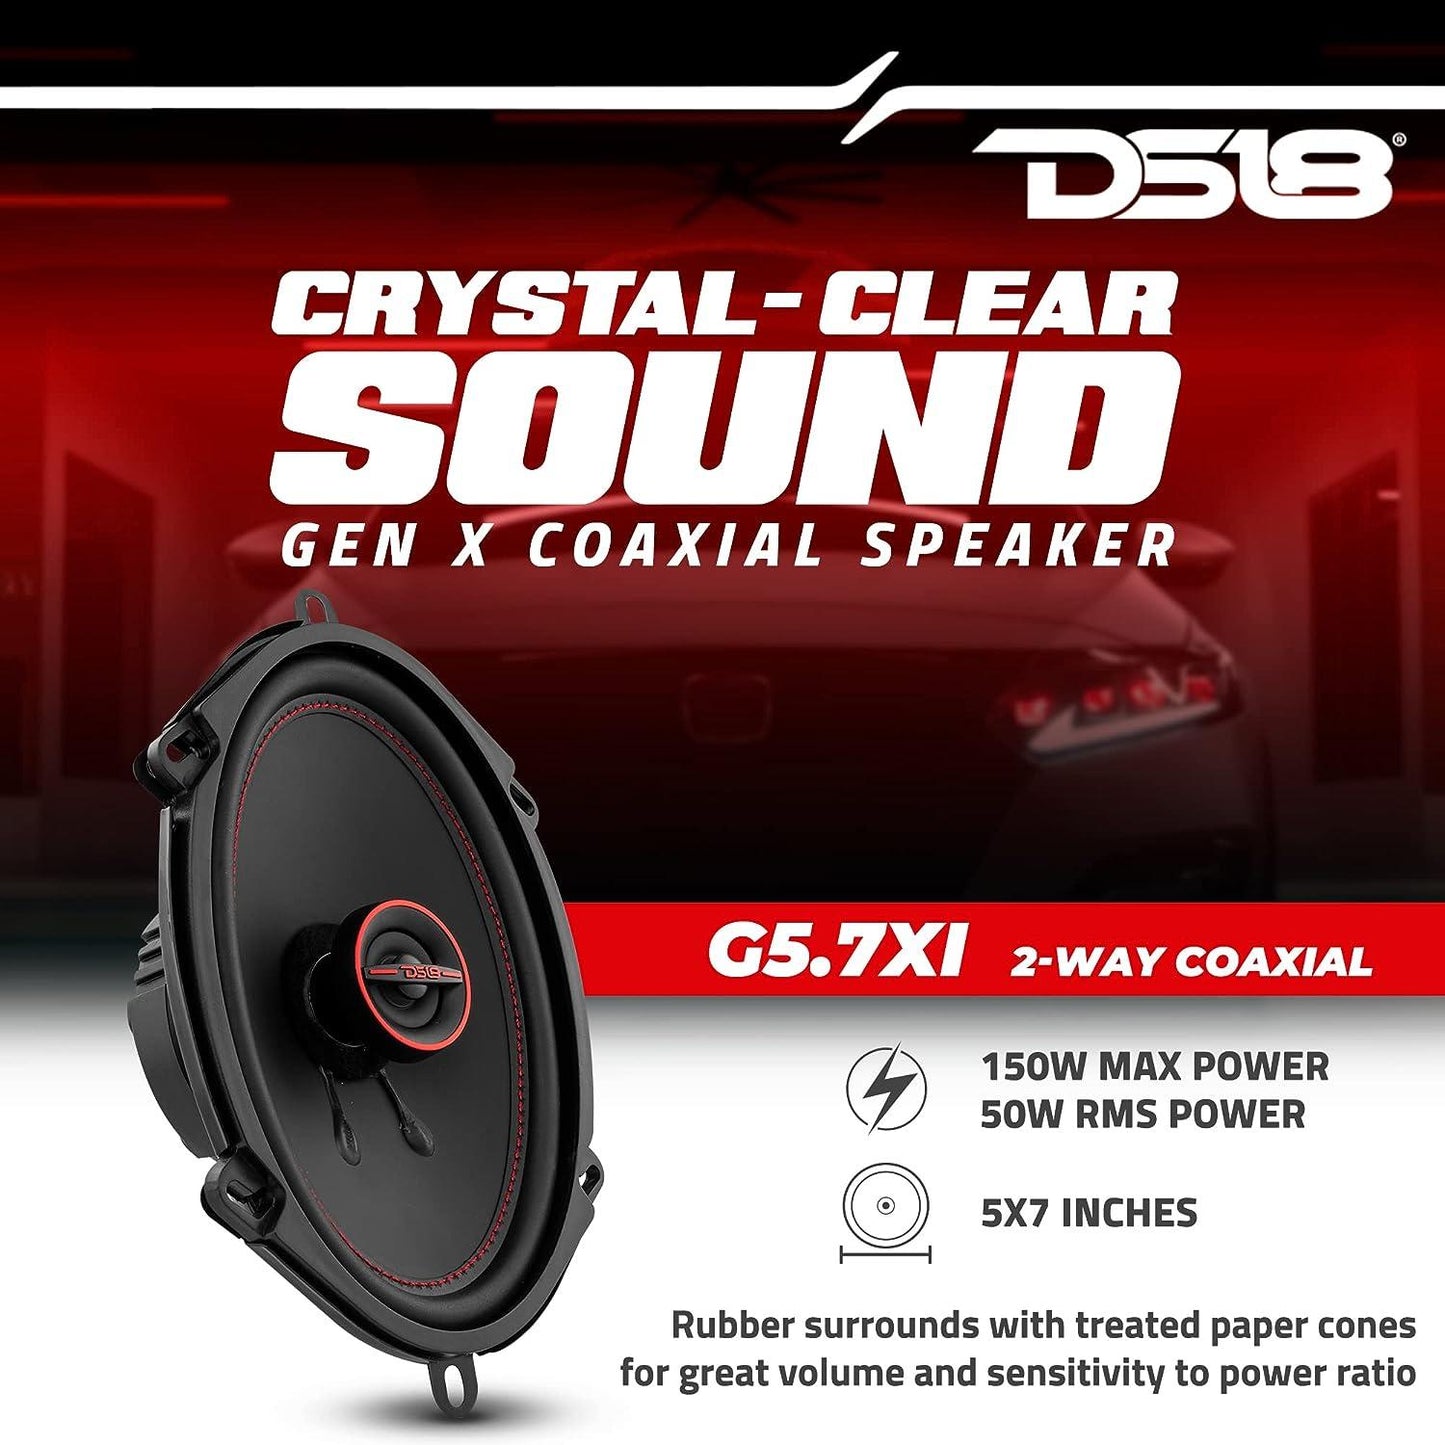 Car audio package for most of Trucks, FORD , RAM , TOYOTA , CHEVY, GMC and more Memphis MBE8S2 Loaded Enclosures 1-8" 2ohm 350RMS/700MAX ,DS18 CANDY-X5B Class D 5-Channel Amplifier with Bass Remote, 2 Pair of DS18 G5.7Xi GEN-X 5x7" 2-Way Coaxial Speakers